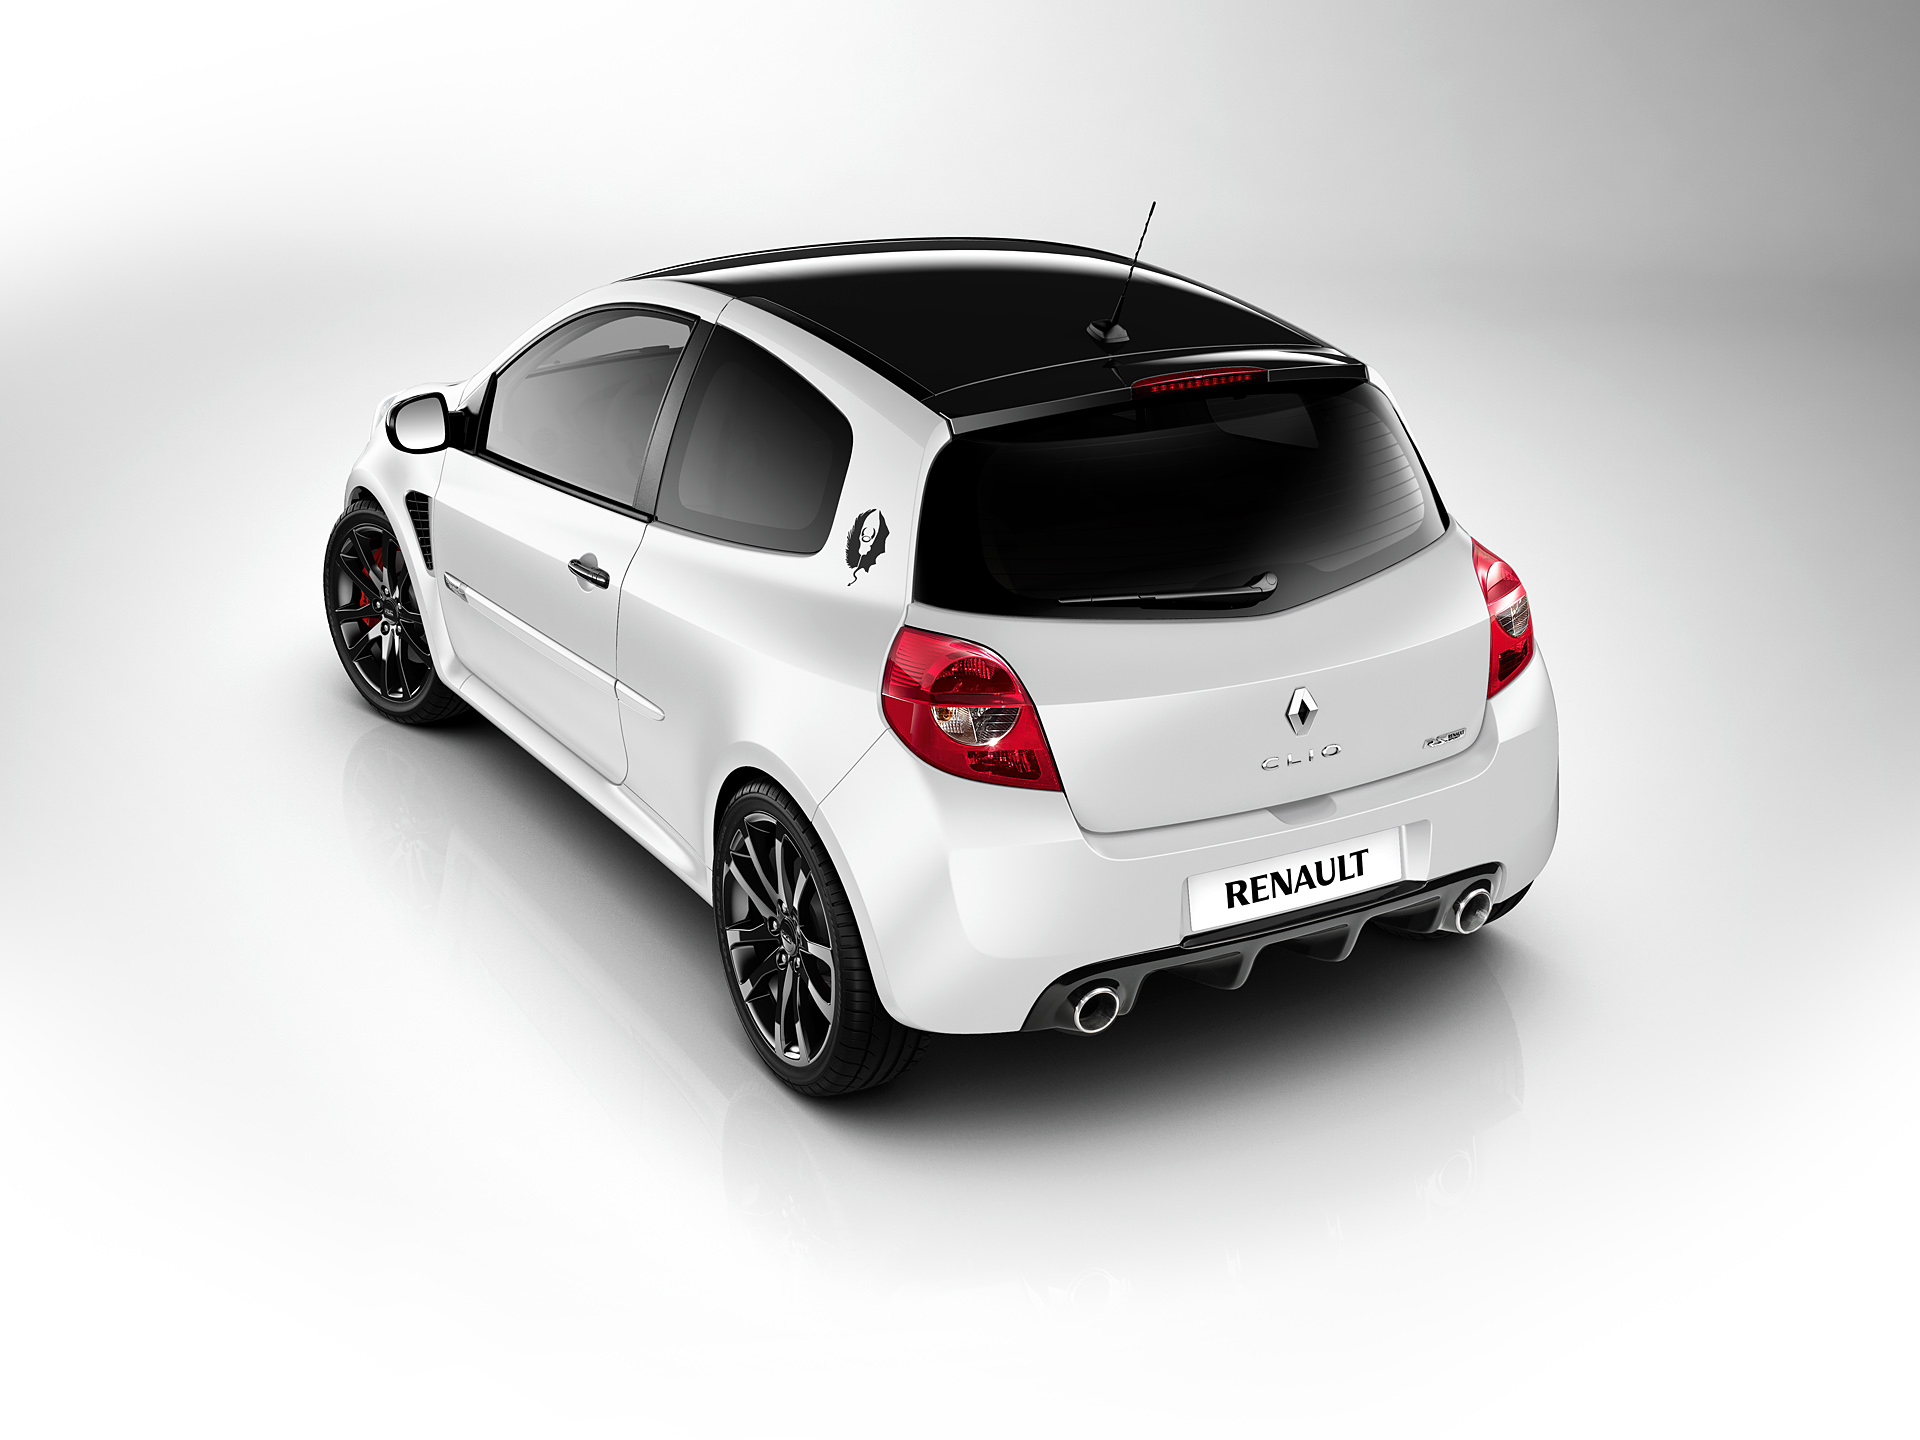  2010 Renault Clio RS Wallpaper.